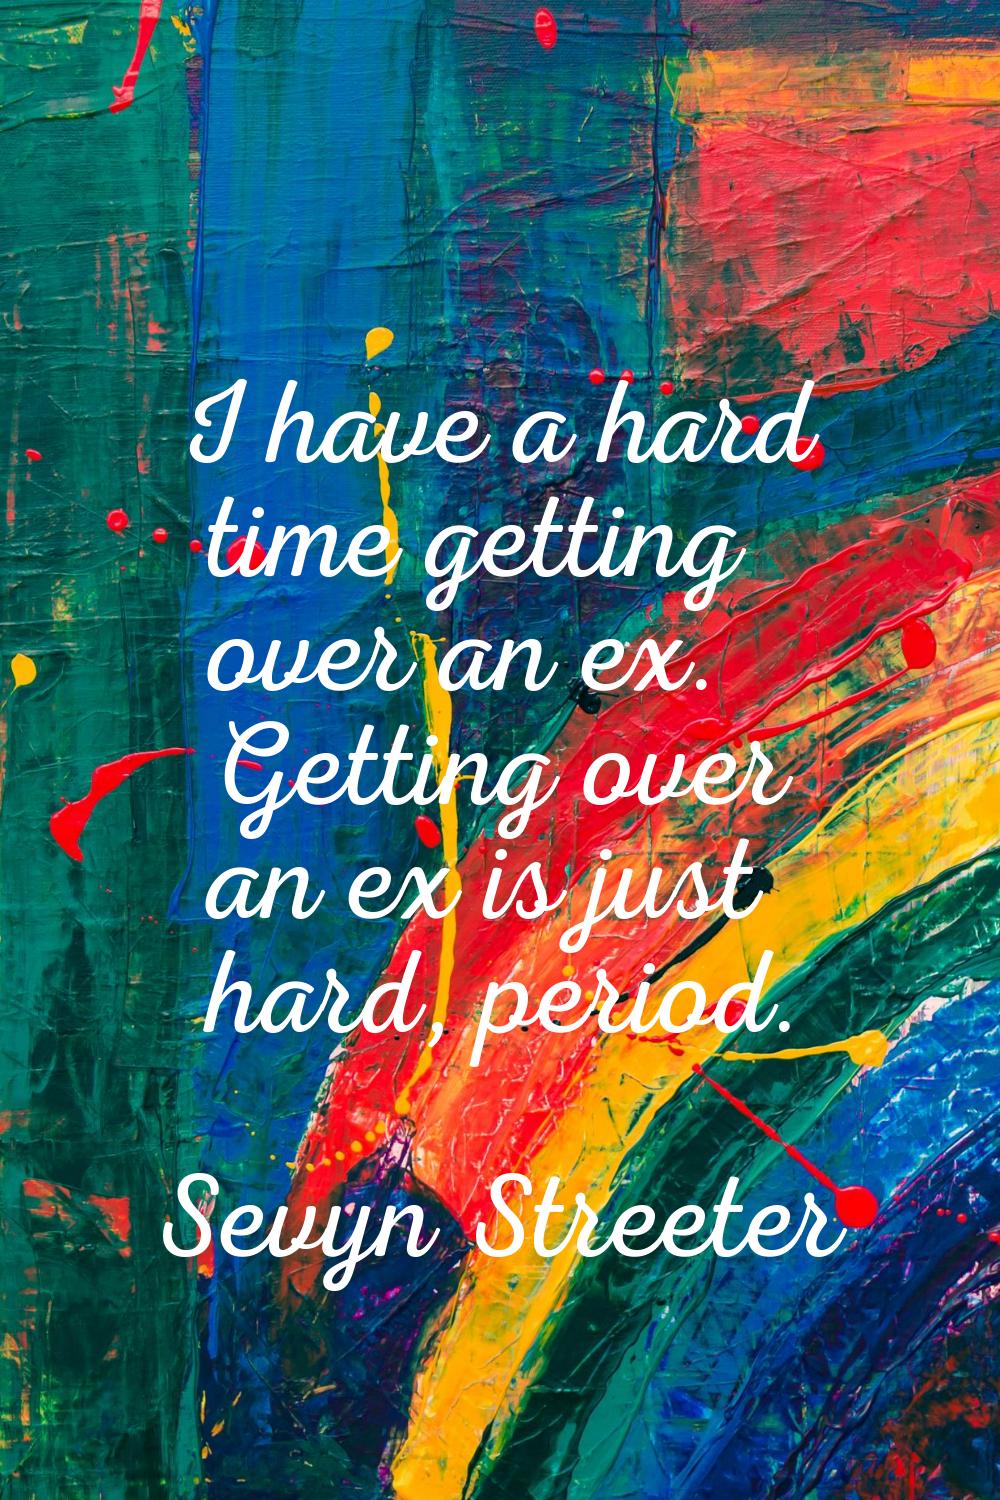 I have a hard time getting over an ex. Getting over an ex is just hard, period.